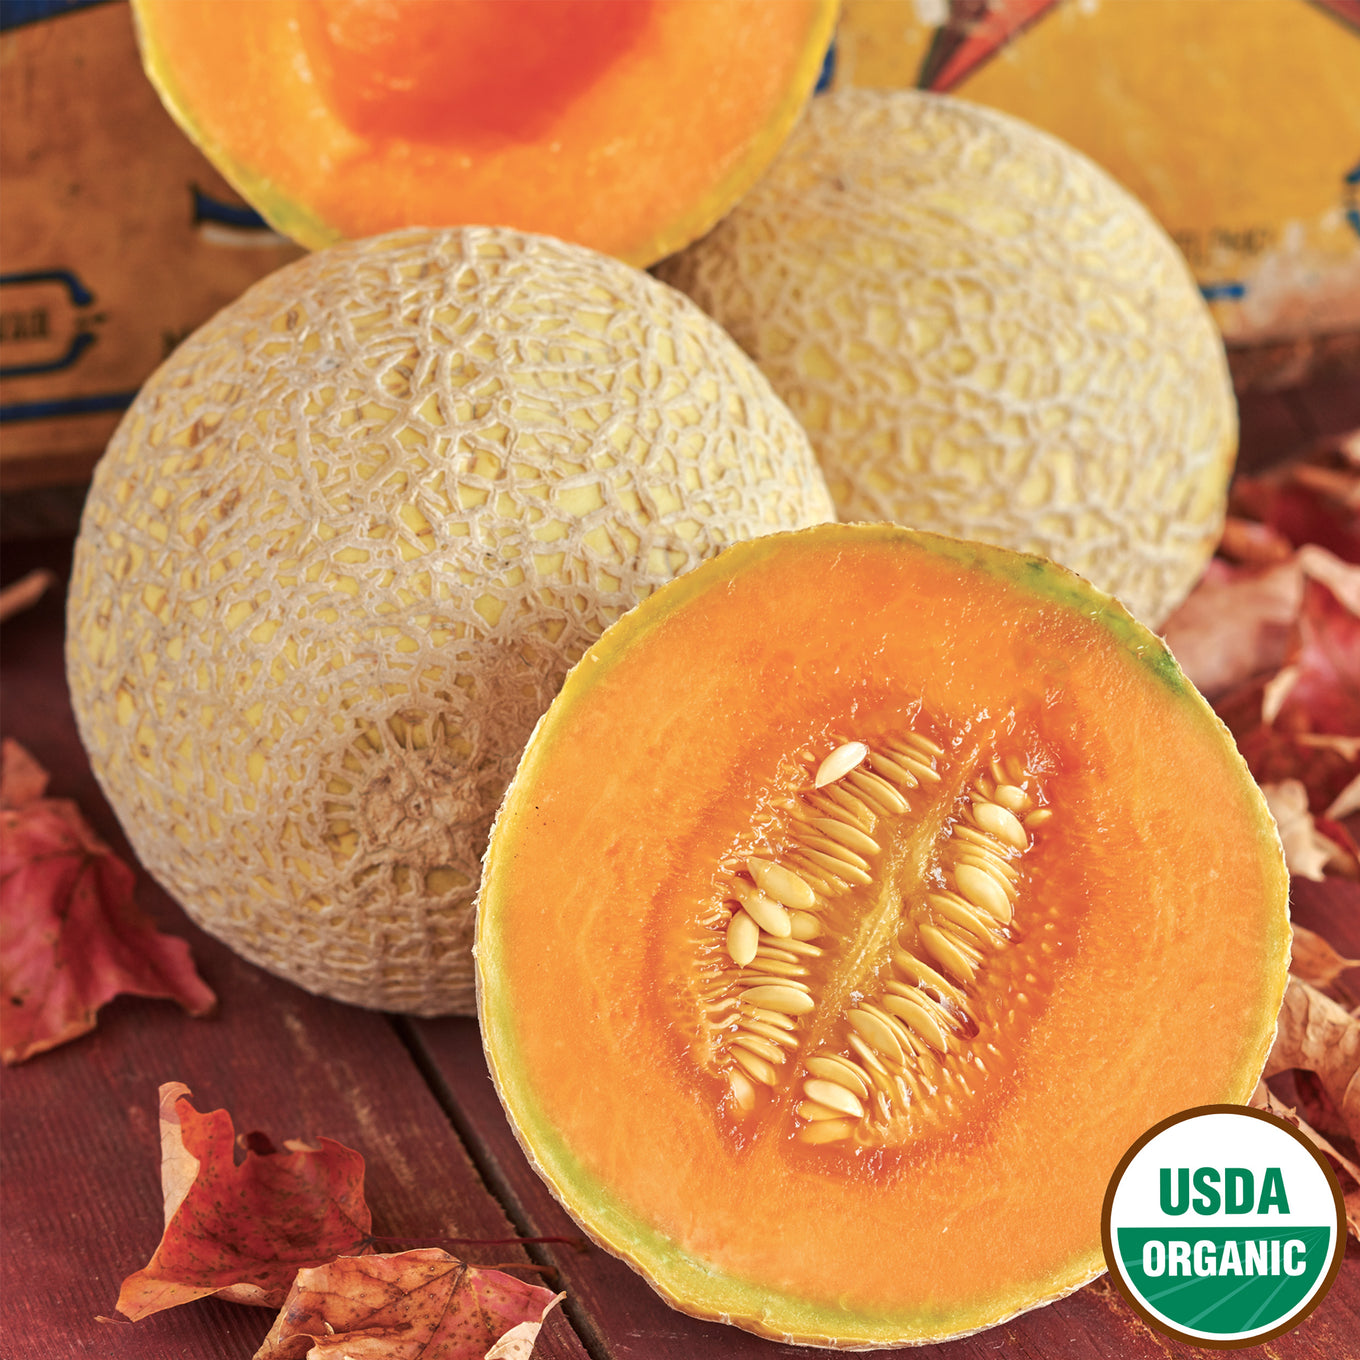 Hearts of Gold Organic Cantaloupe seeds fully matured and harvested, shows melon cut in half for reference of seeds and flesh.